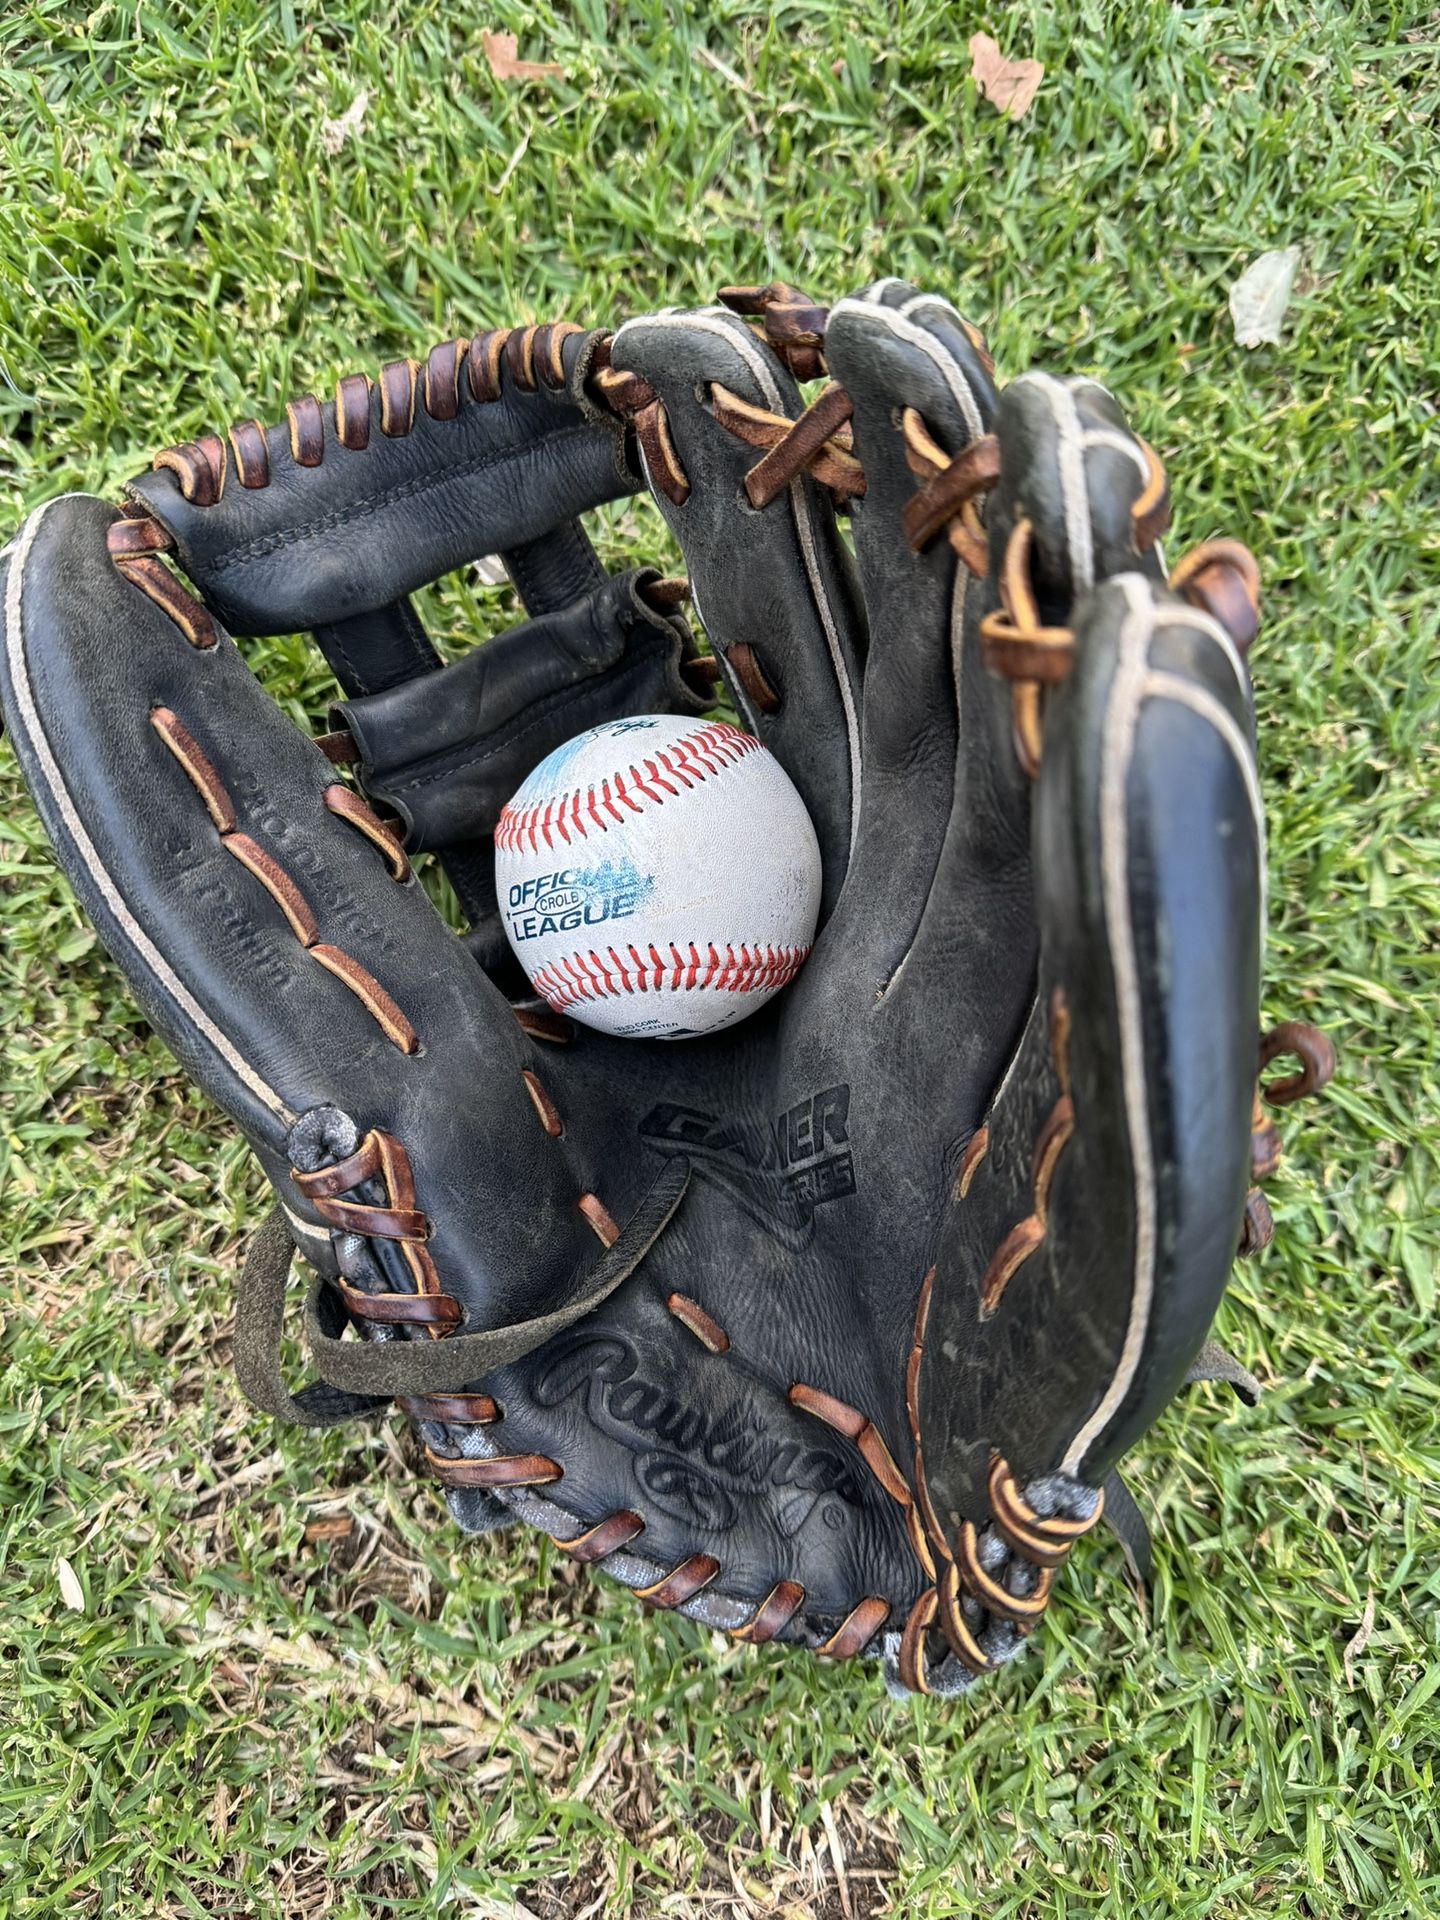 $45 Rawlings Gamer Baseball ⚾️ Glove IT’S AVAILABLE PLS DONT ASK!!! 